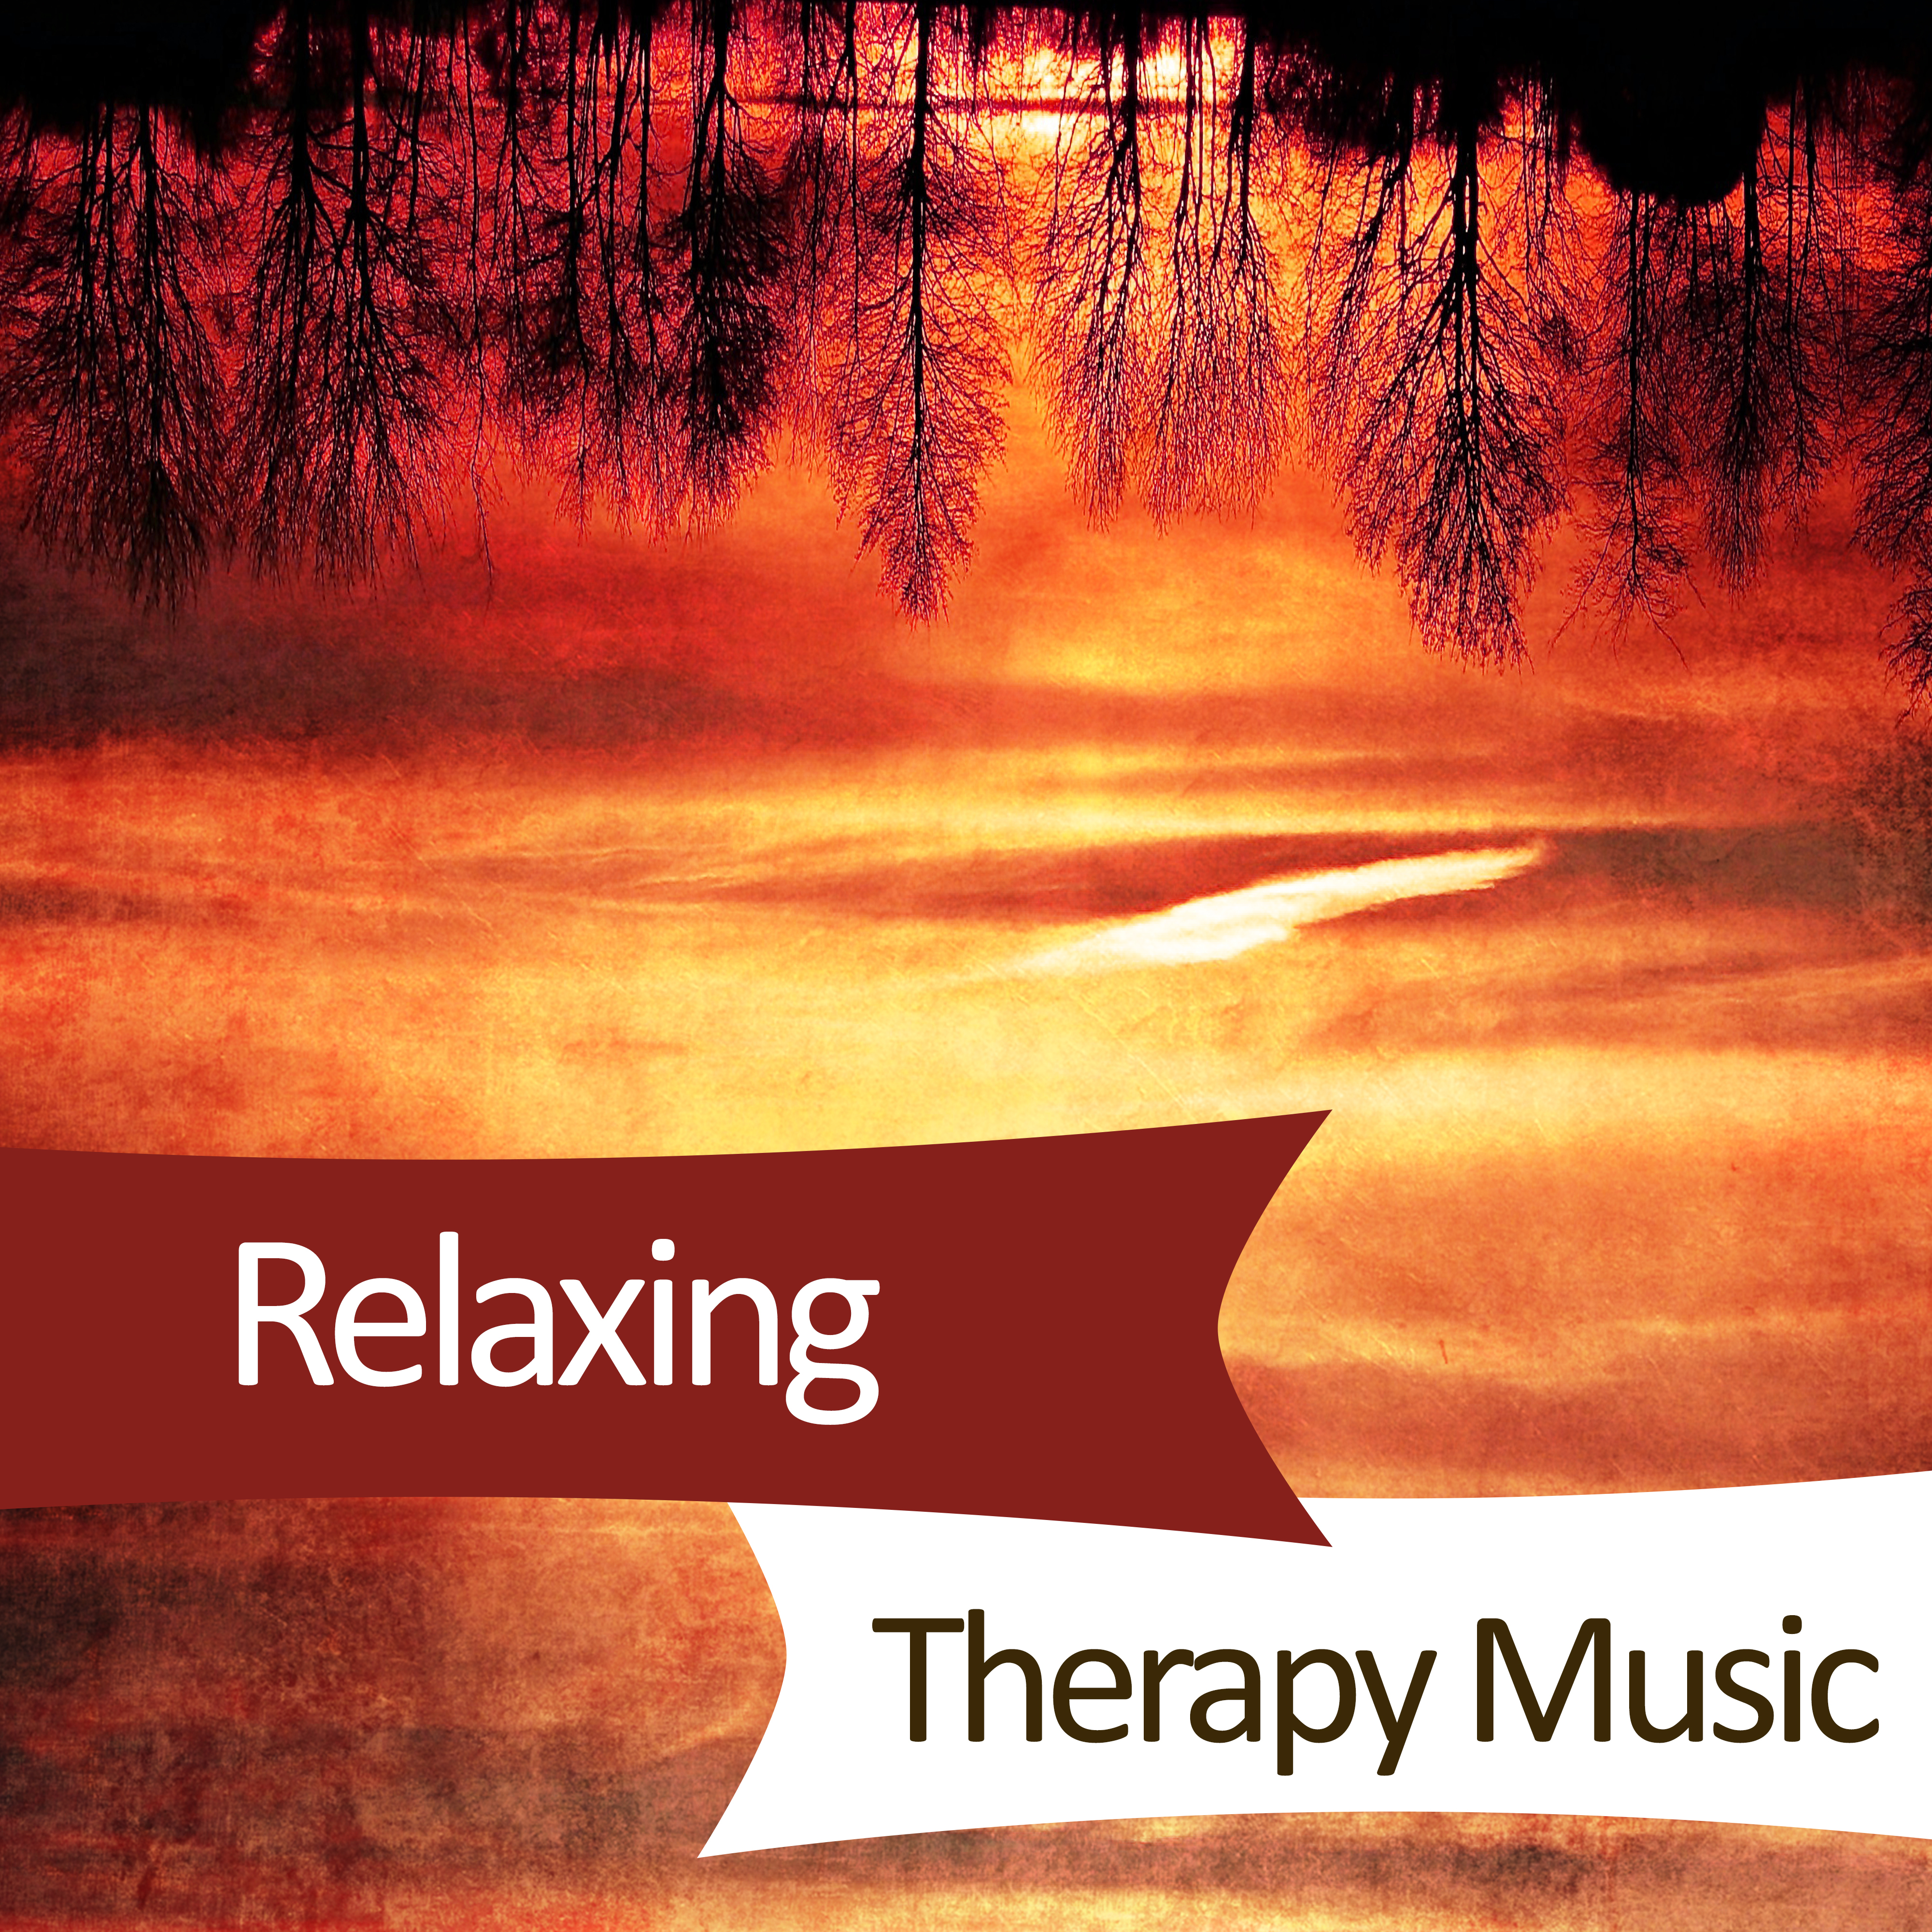 Relaxing Therapy Music  Sounds for Relaxation, Stress Free, Peaceful Music, Pure Rest, Calm Mind, New Age Music